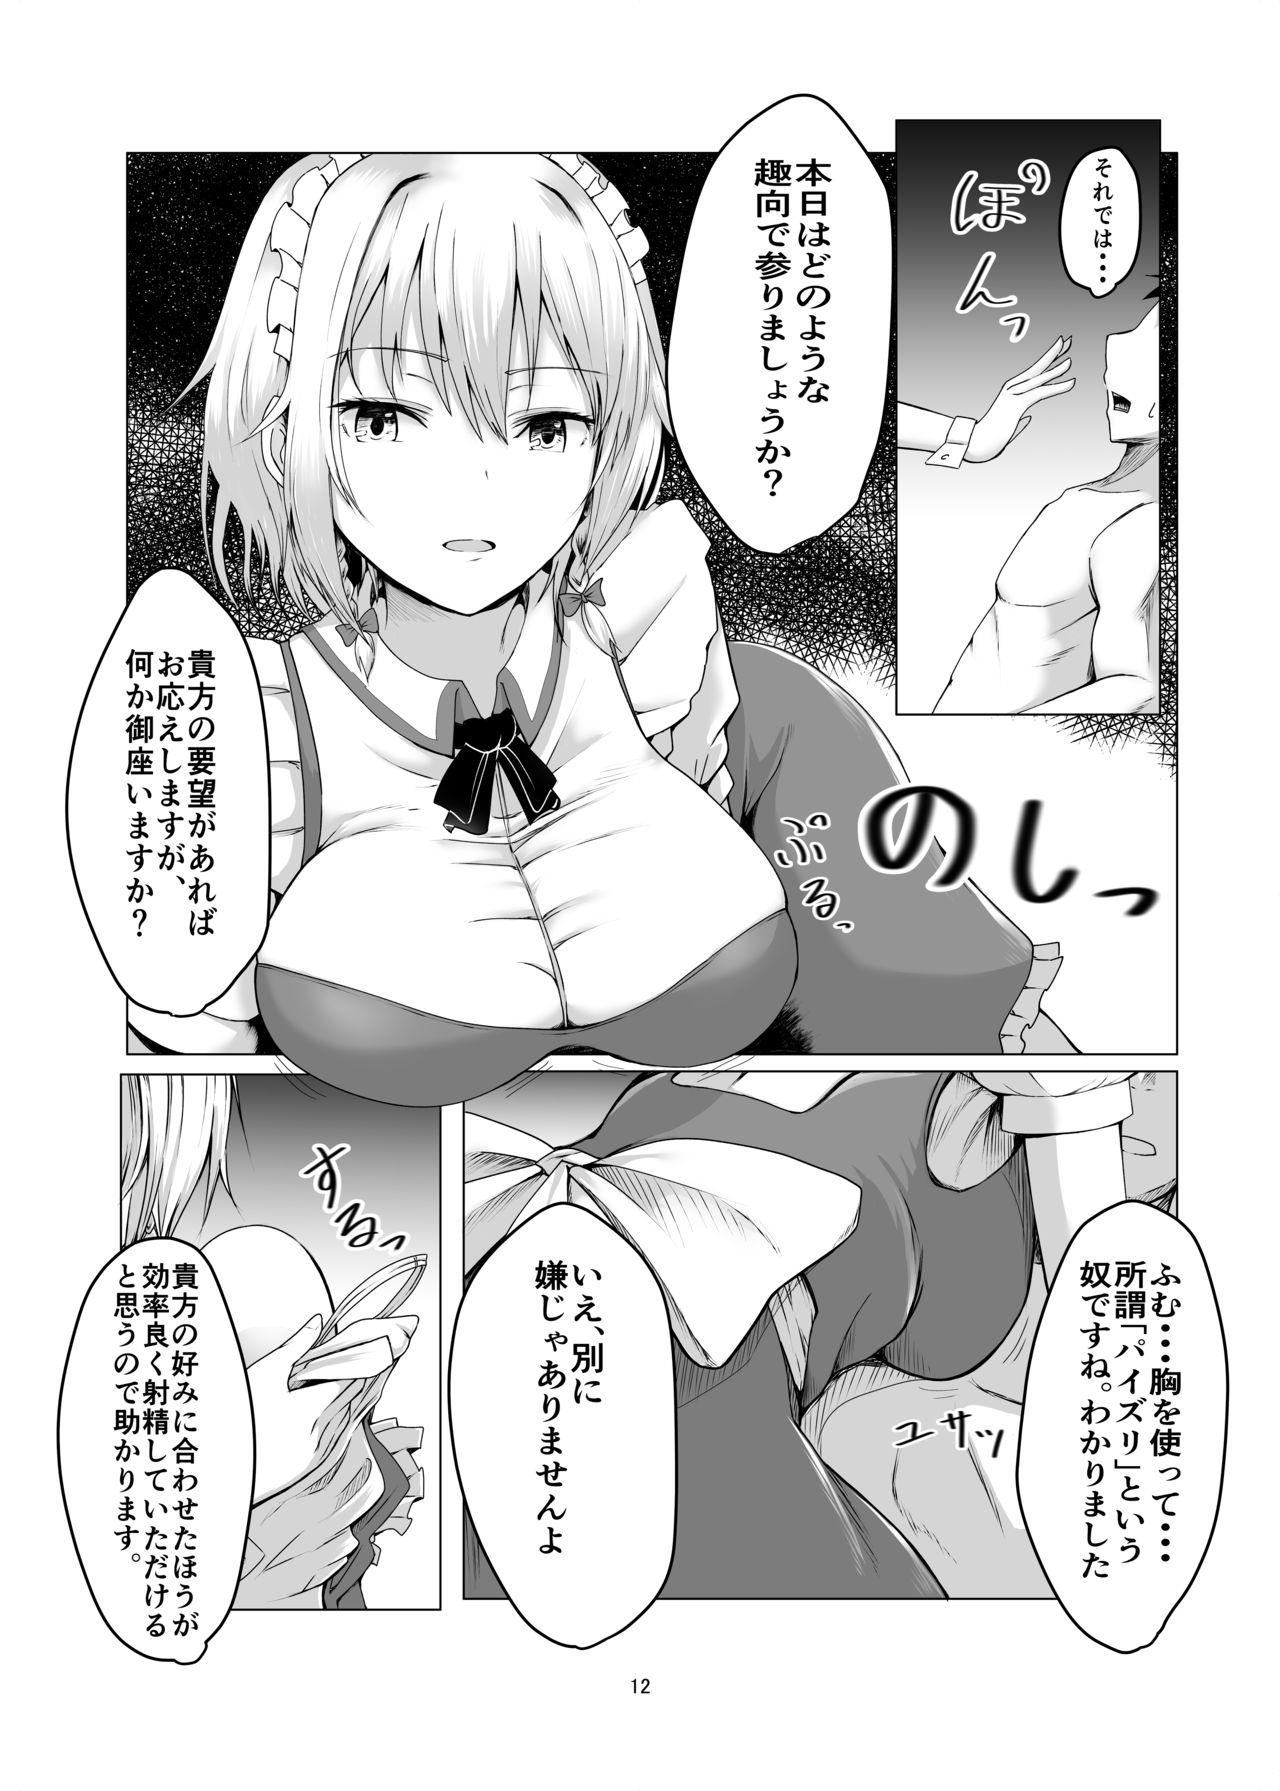 Gay 3some 咲夜さんに淡々と搾精されるマンガ - Touhou project Sapphicerotica - Page 11